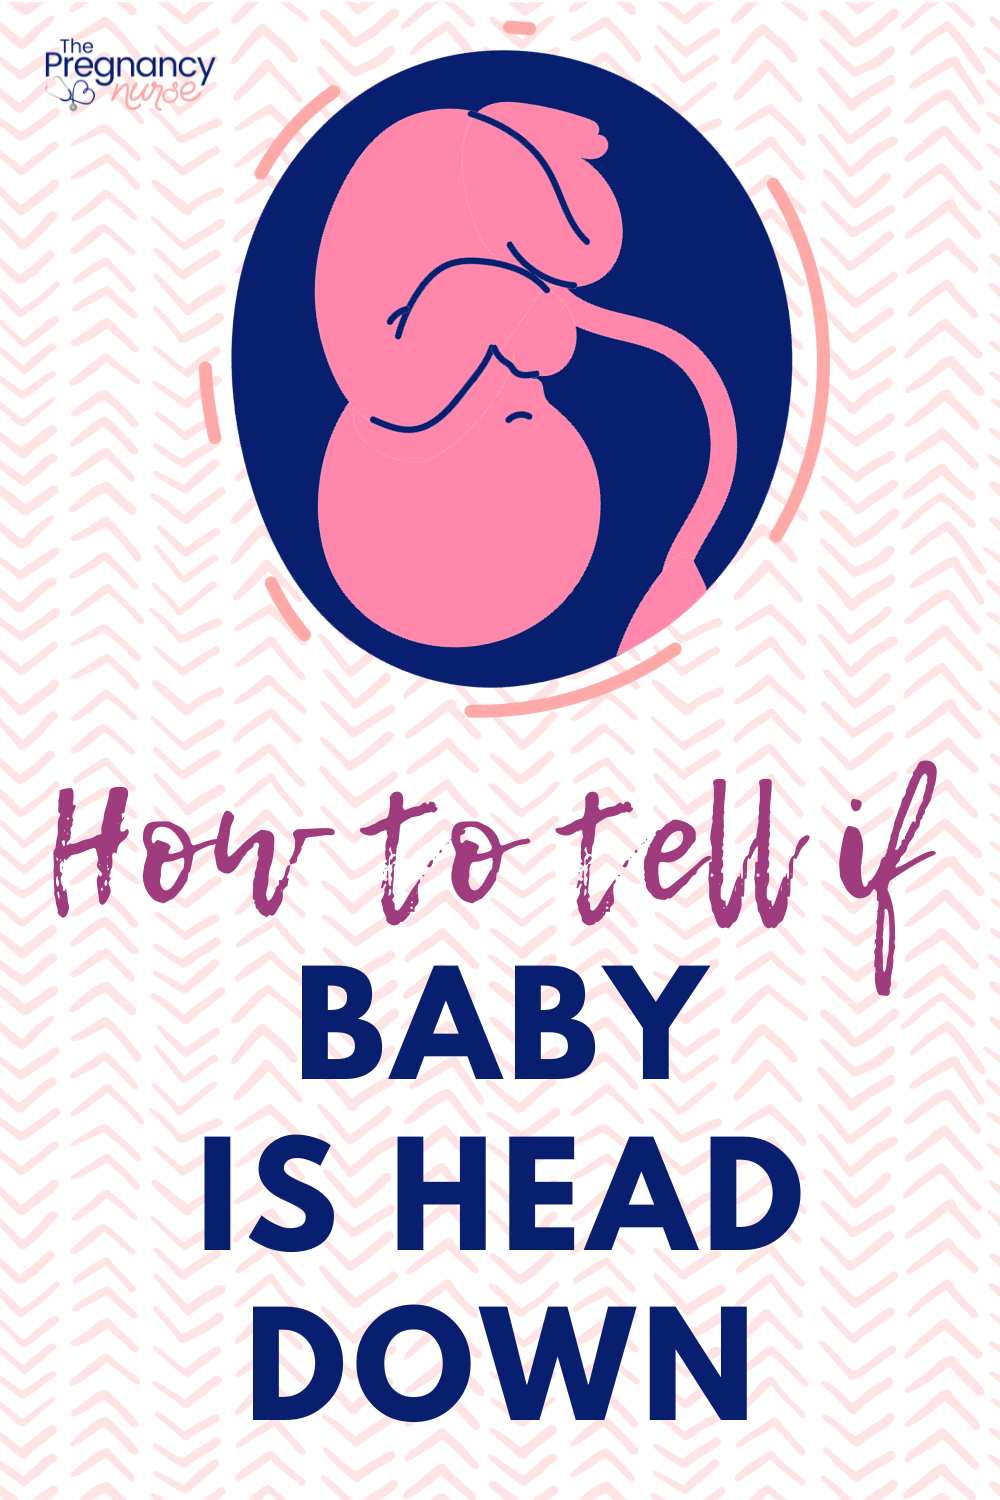 Discover an essential guide to understanding your baby's position in the womb. With 'Unlocking Baby Positions,' unravel the signs that indicate if your little one is head down. An absolute must-read for expecting parents, brimming with invaluable tips to help you prepare for childbirth.